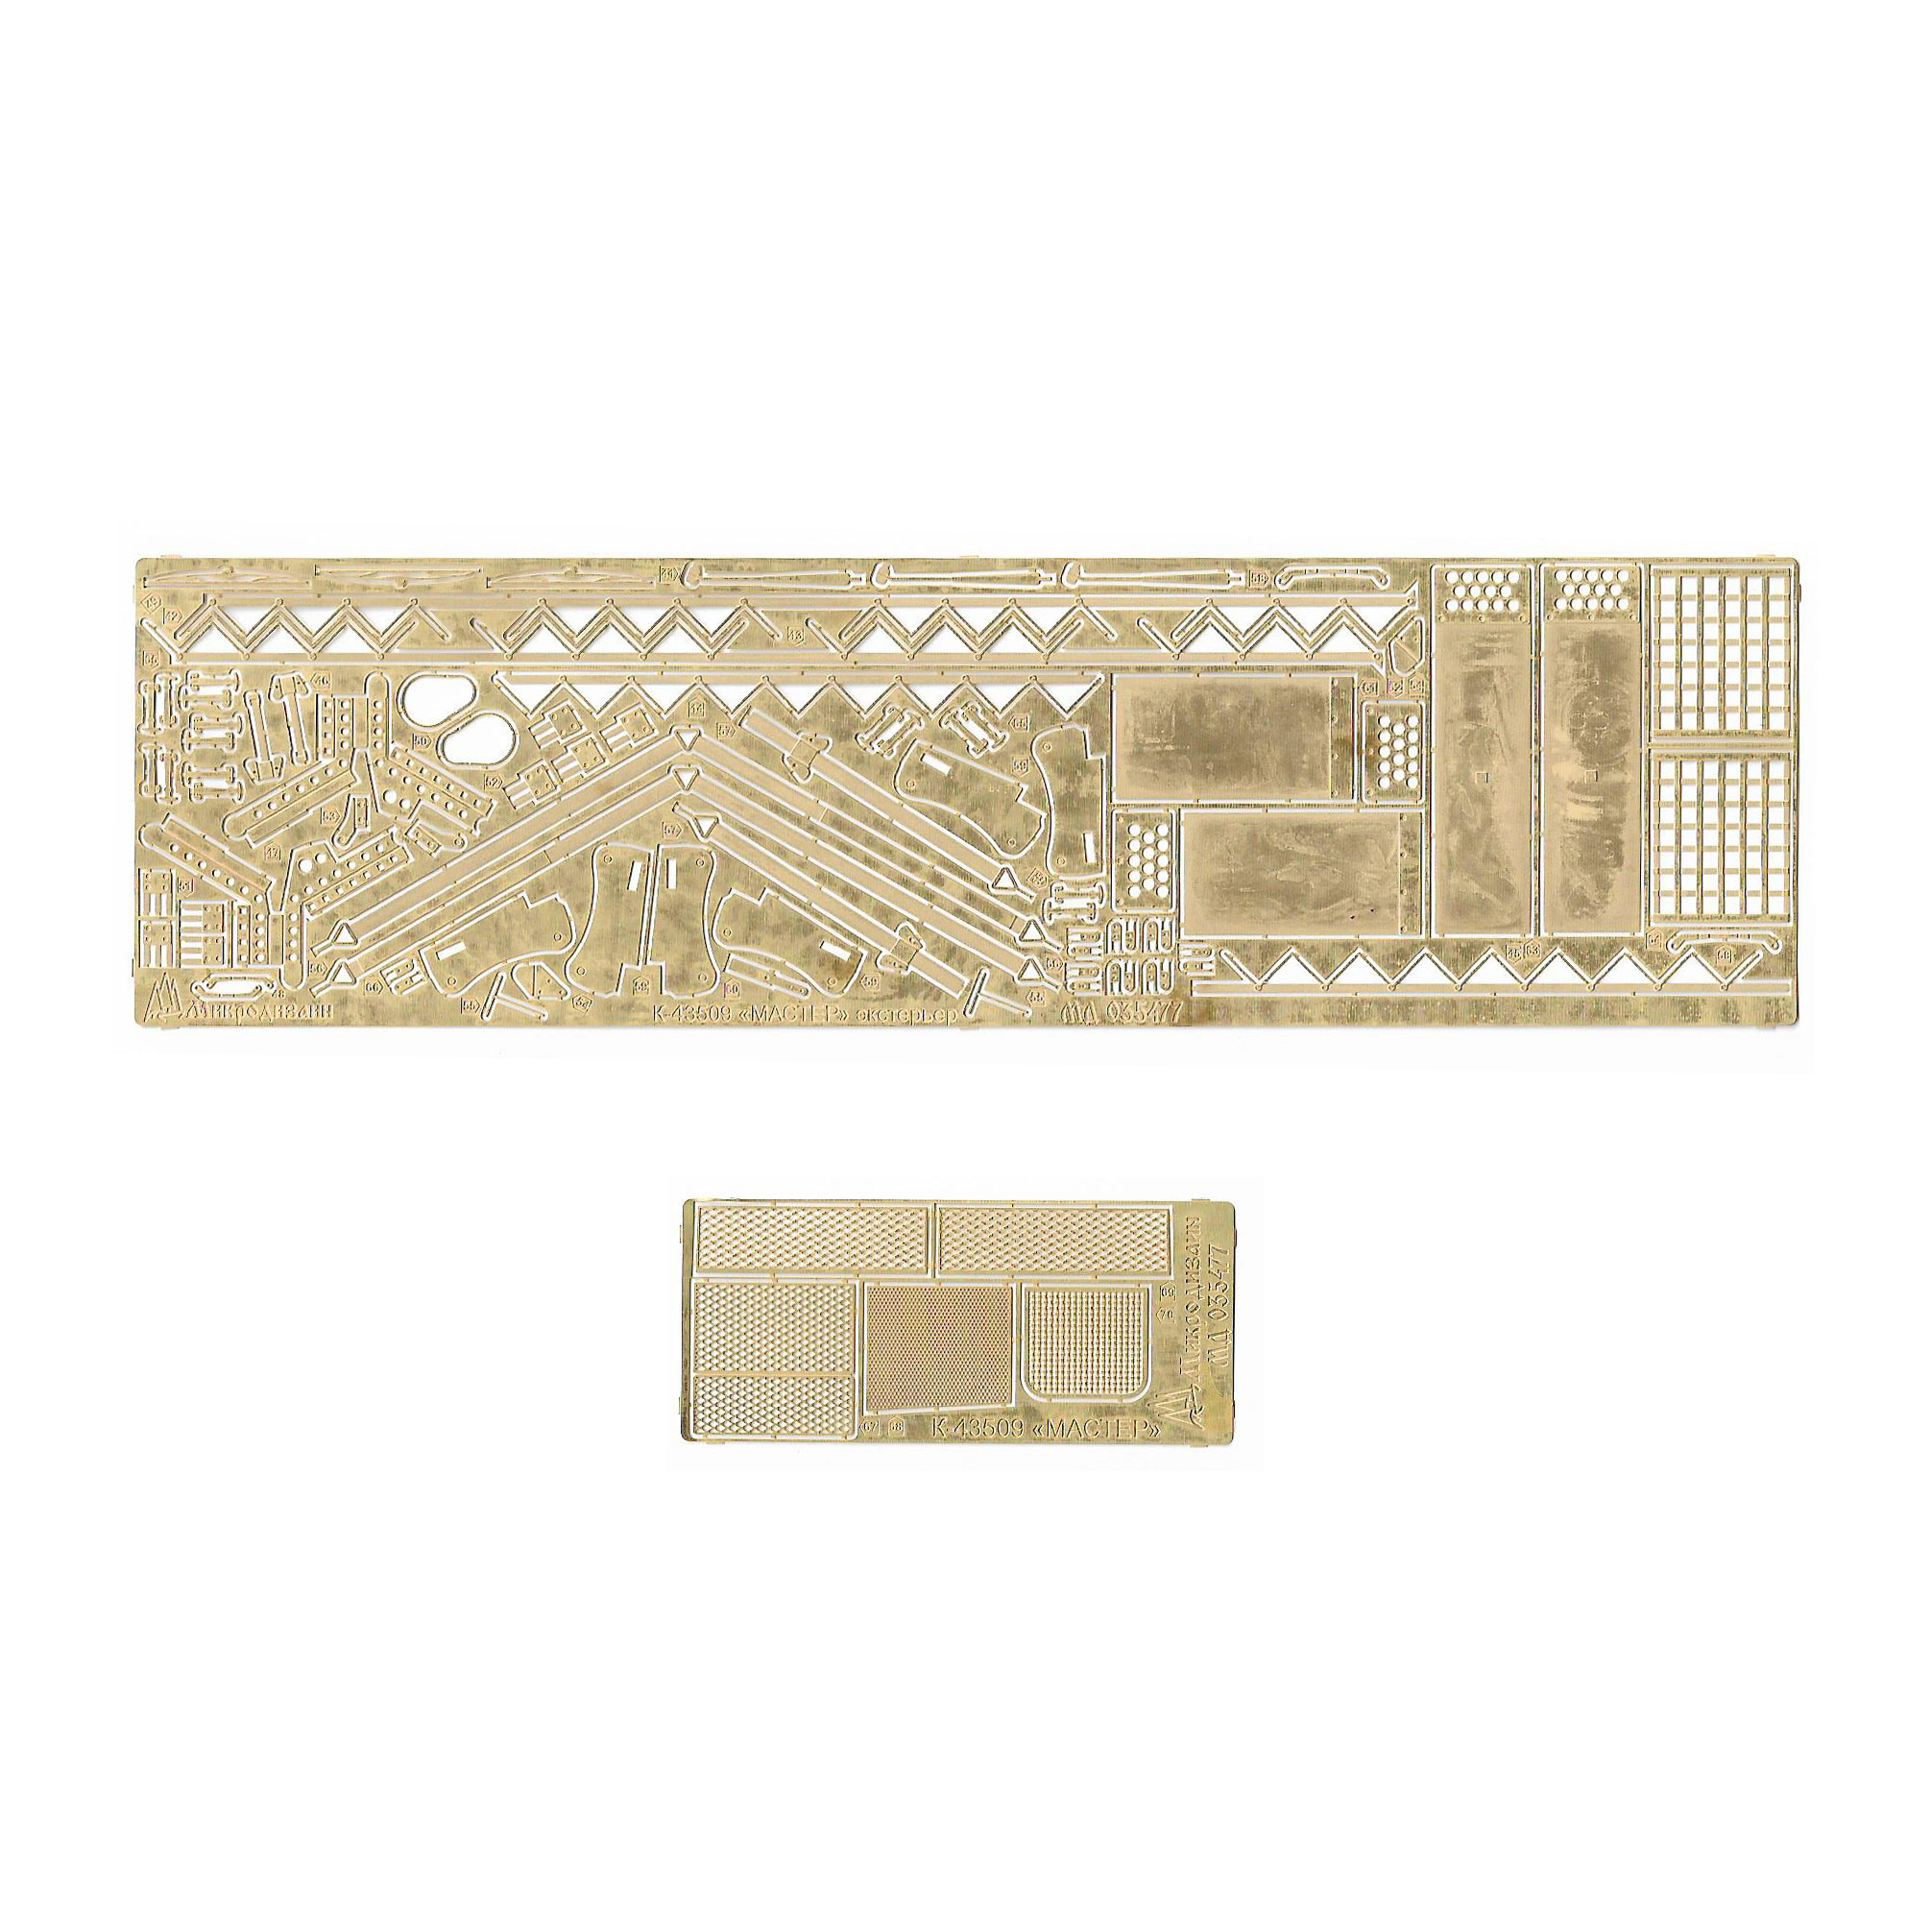 035477 Microdesign 1/35 Photo etching kit for the assembled model K-43509 